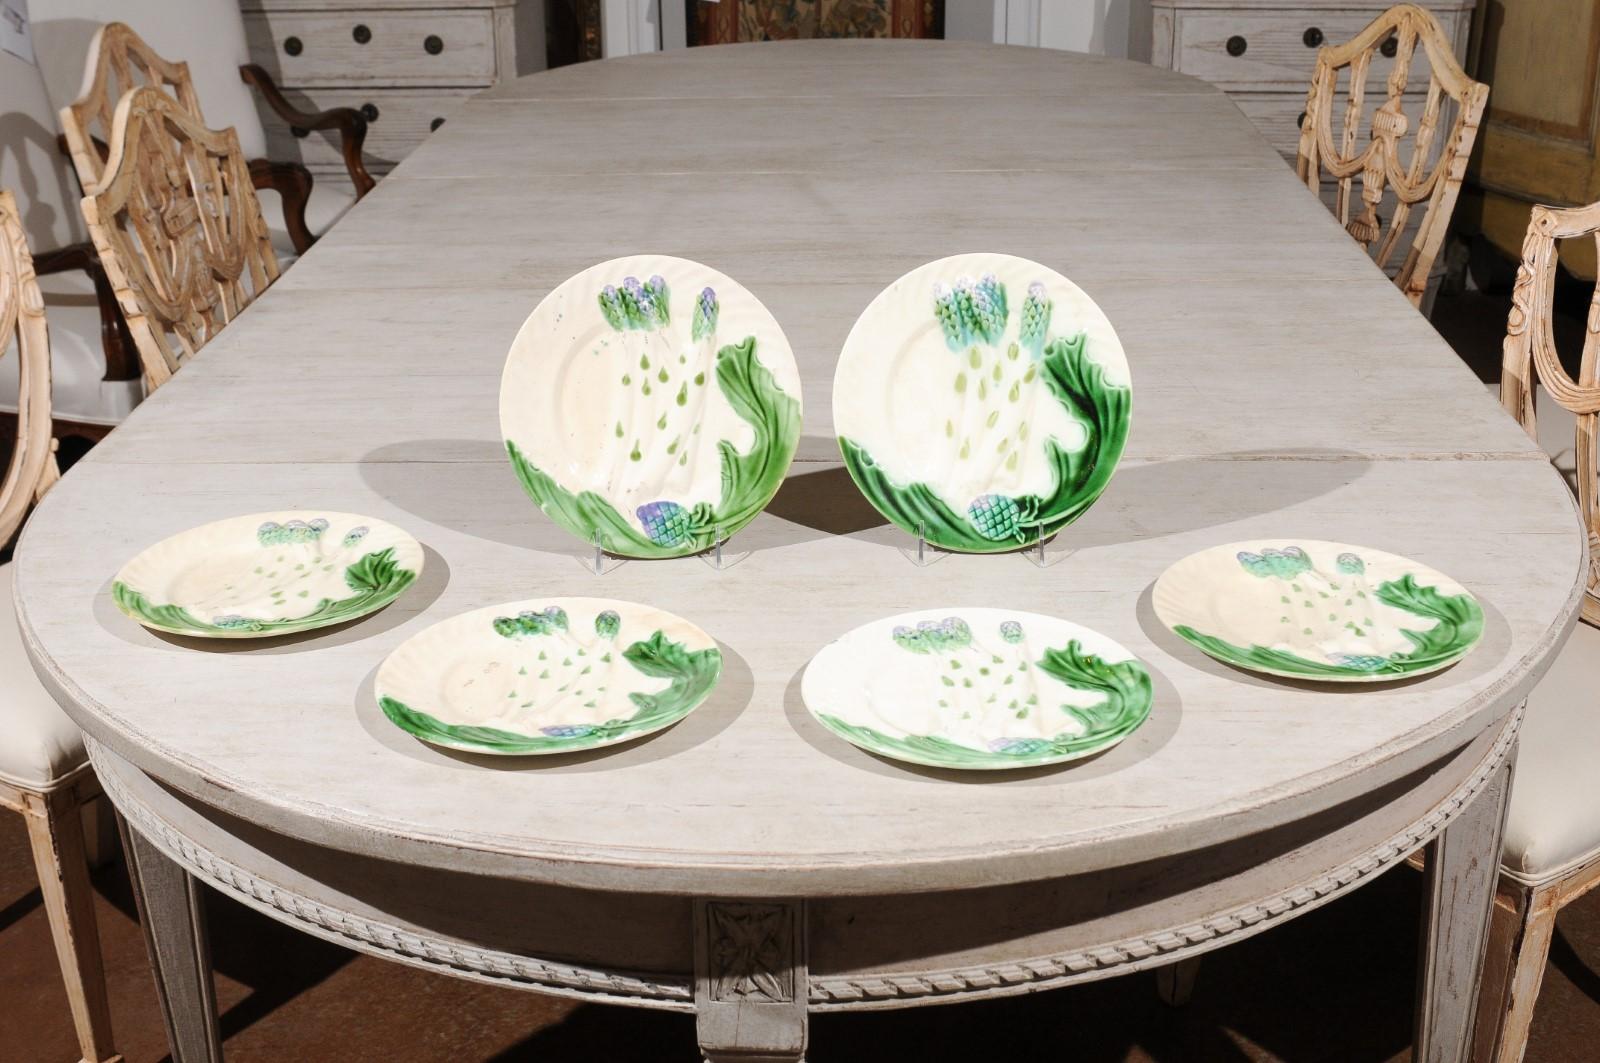 A set of French hand painted Majolica asparagus dinner plates from the late 19th century, with curving green leaves, priced and sold individually. Born in France during the later years of the 19th century, each of this set of Majolica asparagus